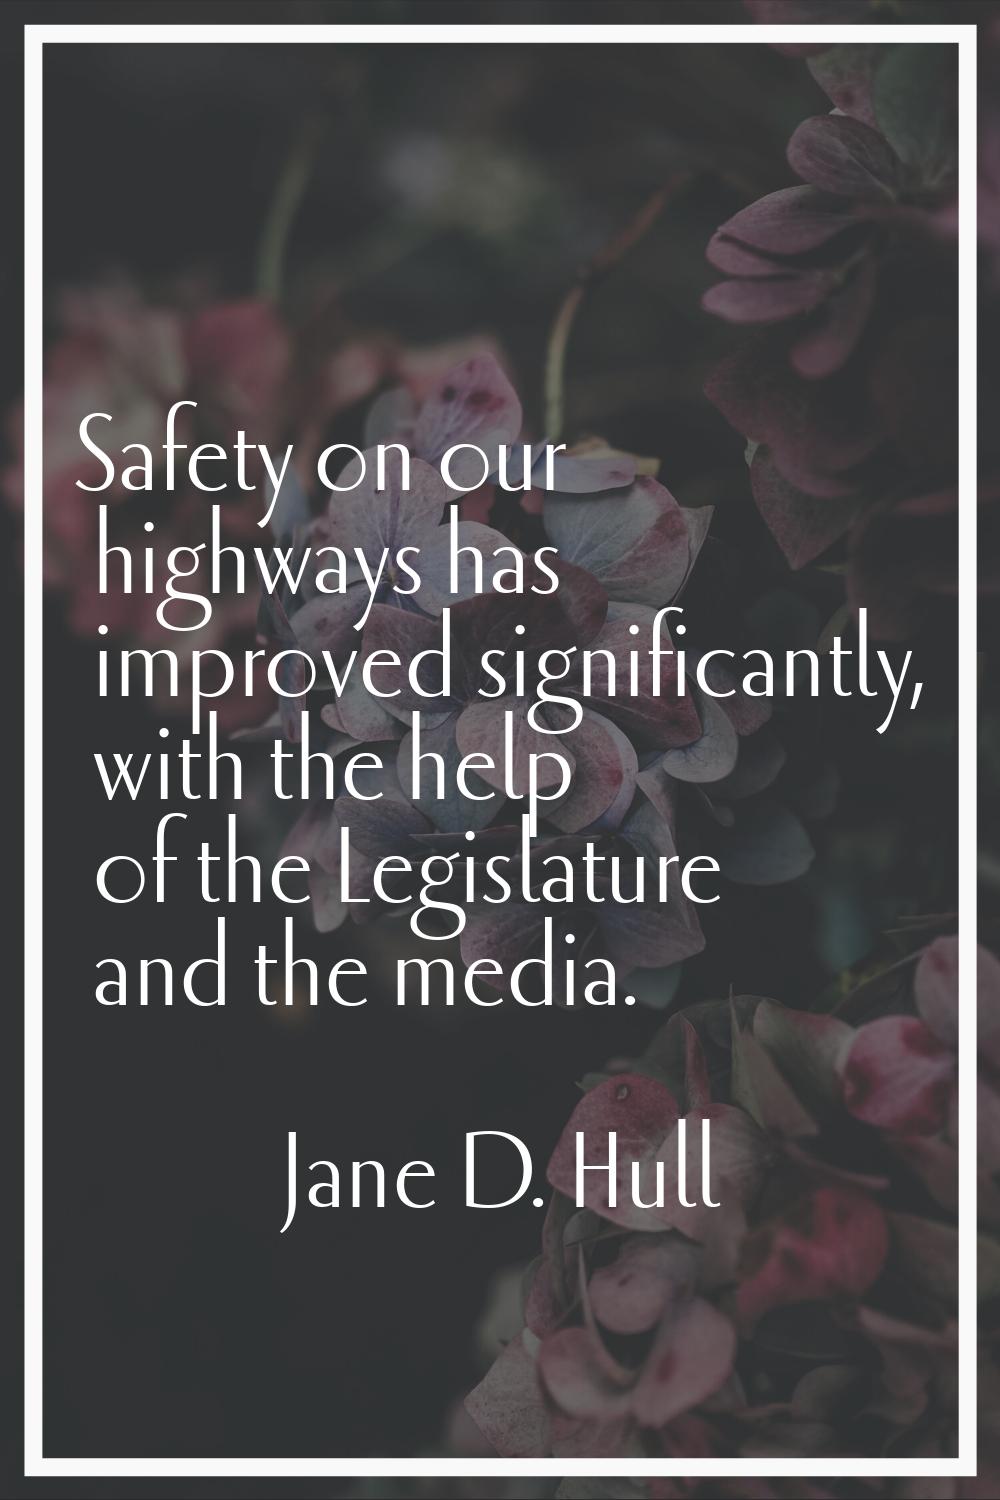 Safety on our highways has improved significantly, with the help of the Legislature and the media.